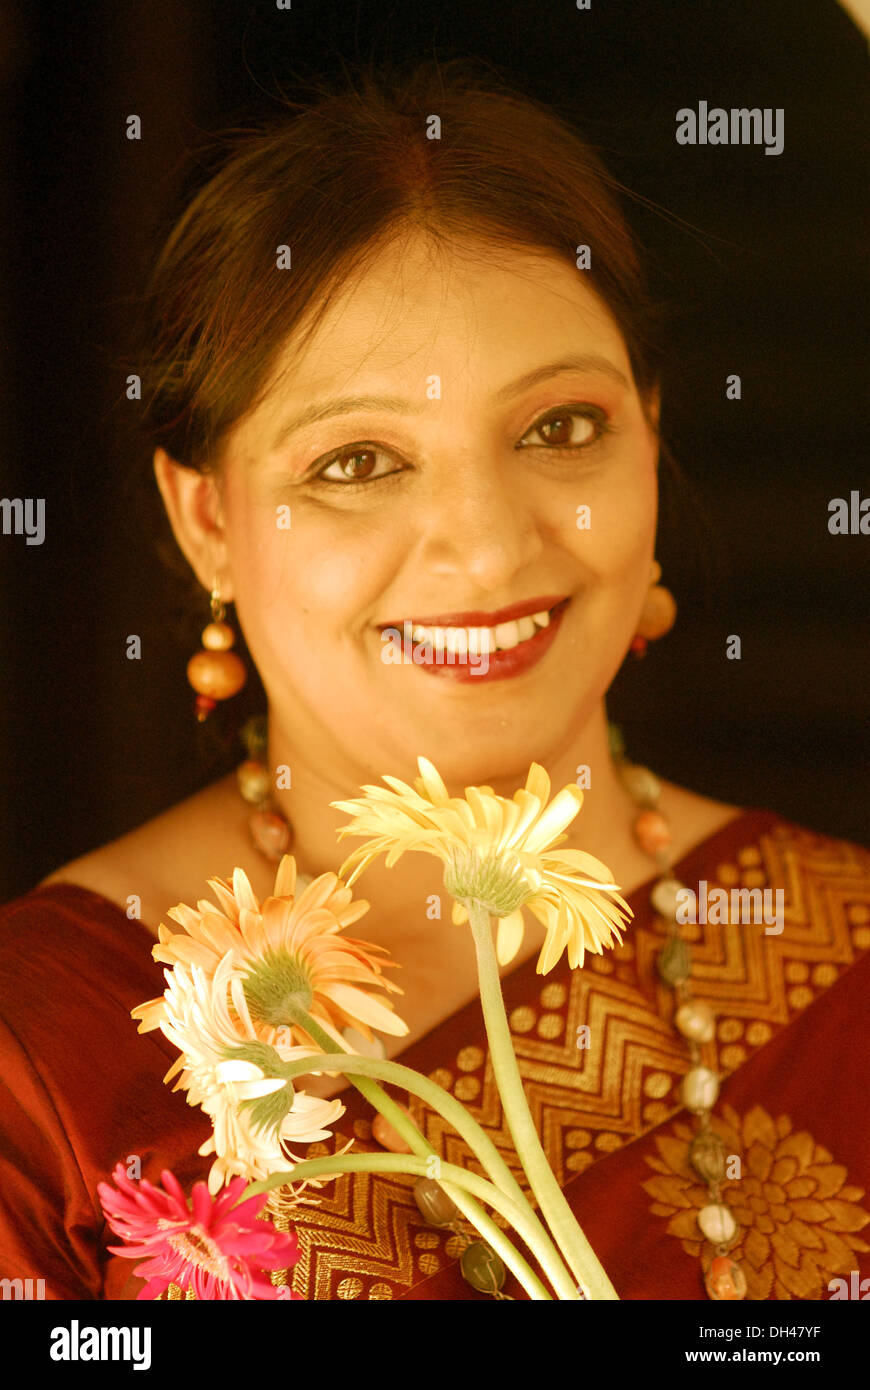 Stock Photo - happy smiling Indian woman portrait with white flowers India - MR#515 - happy-smiling-indian-woman-portrait-with-white-flowers-india-mr515-DH47YF